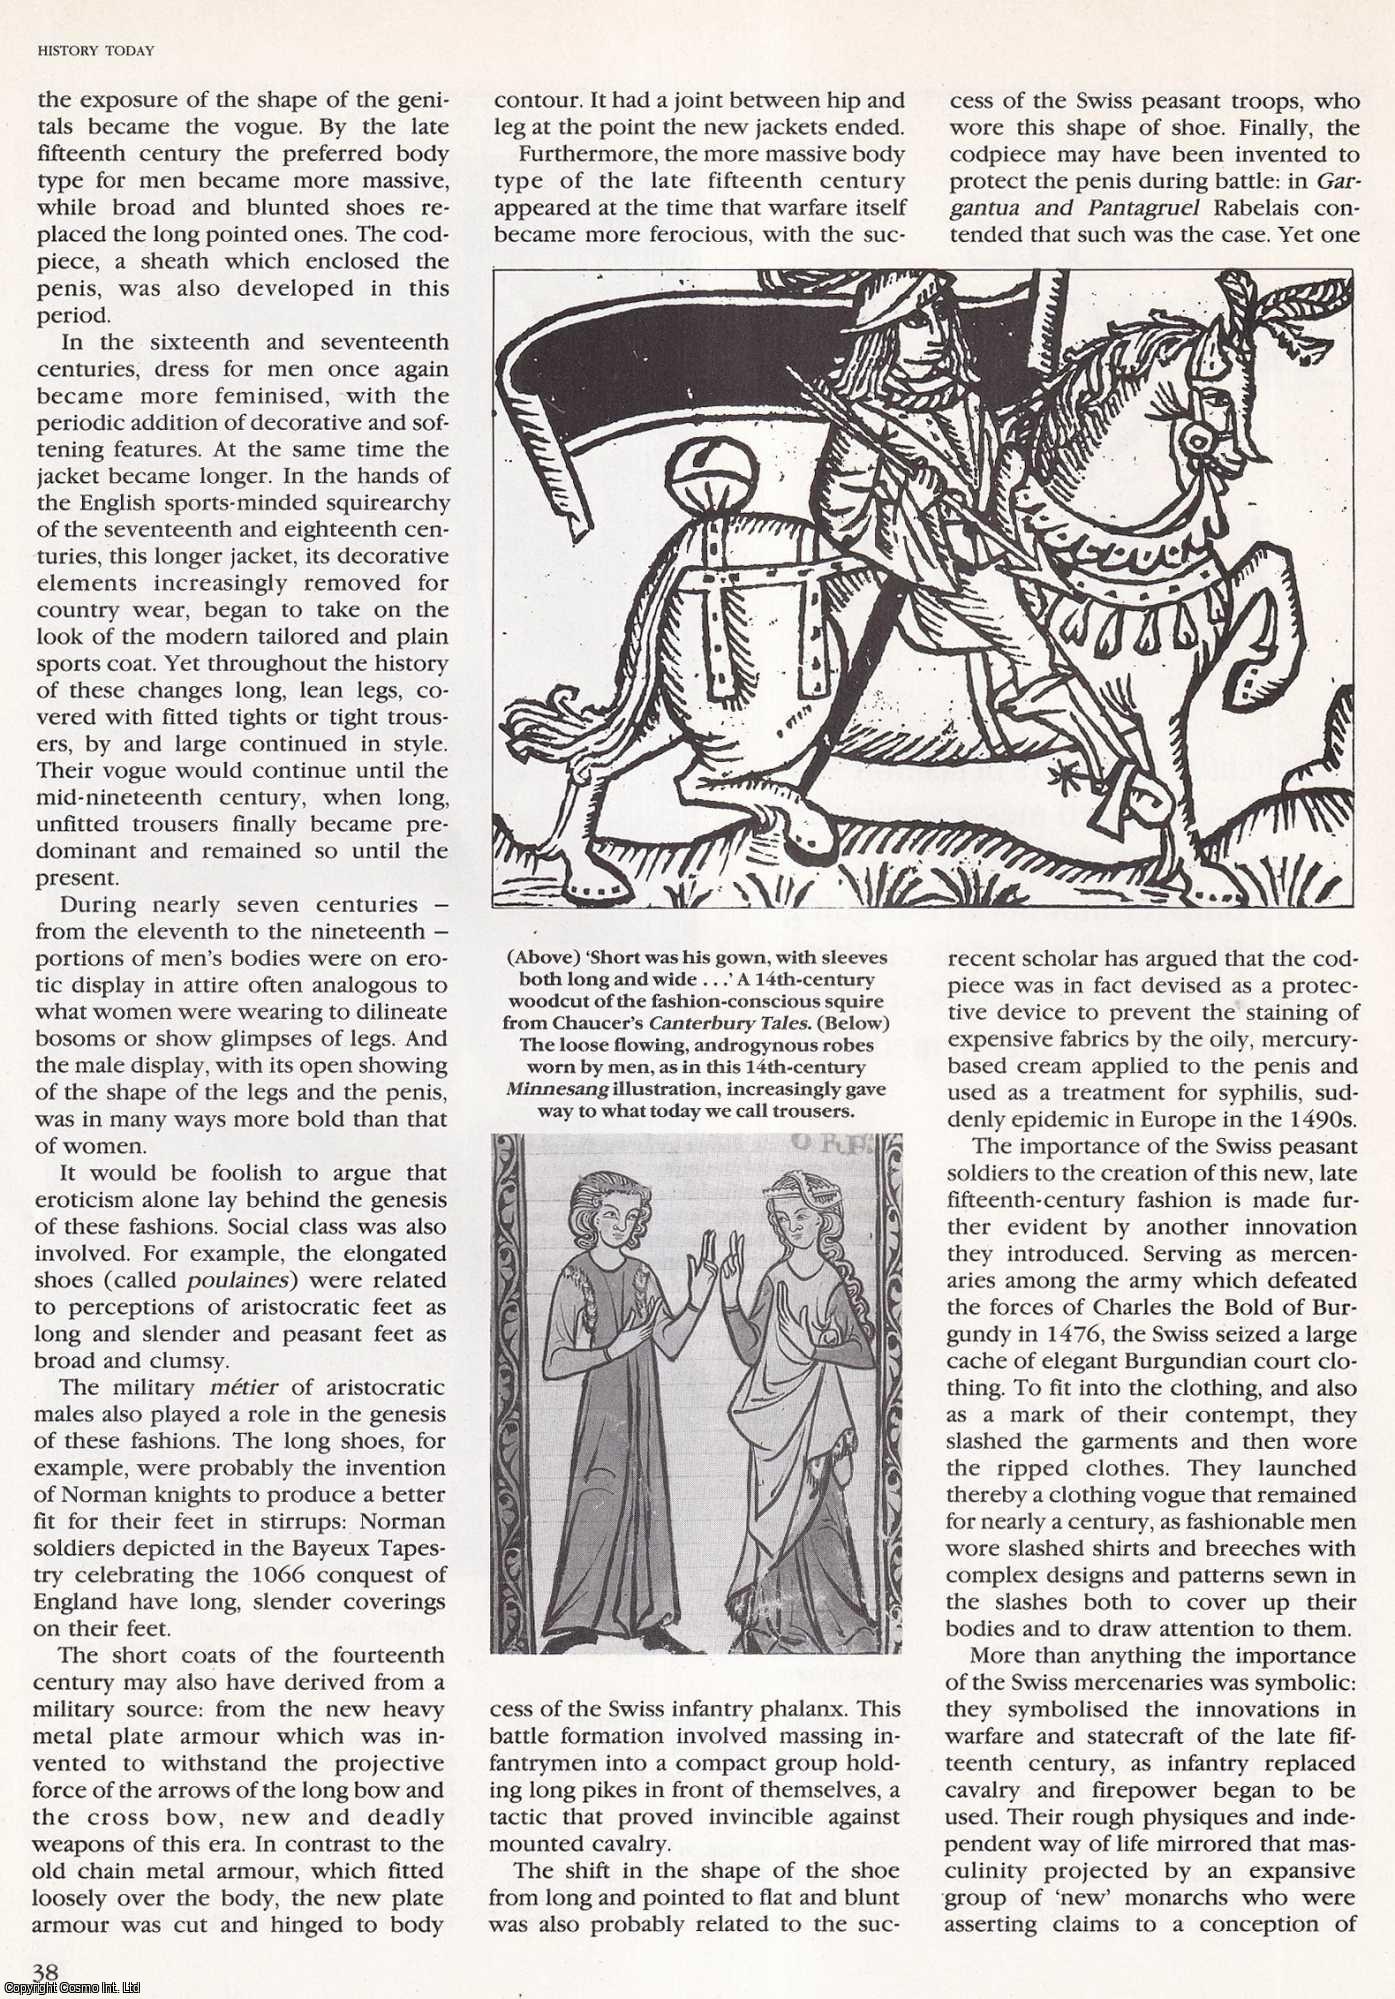 Lois Banner - The Fashionable Sex, 1100-1600: The Social and Sexual Messages Sent via Medieval Clothing. An original article from History Today, 1992.